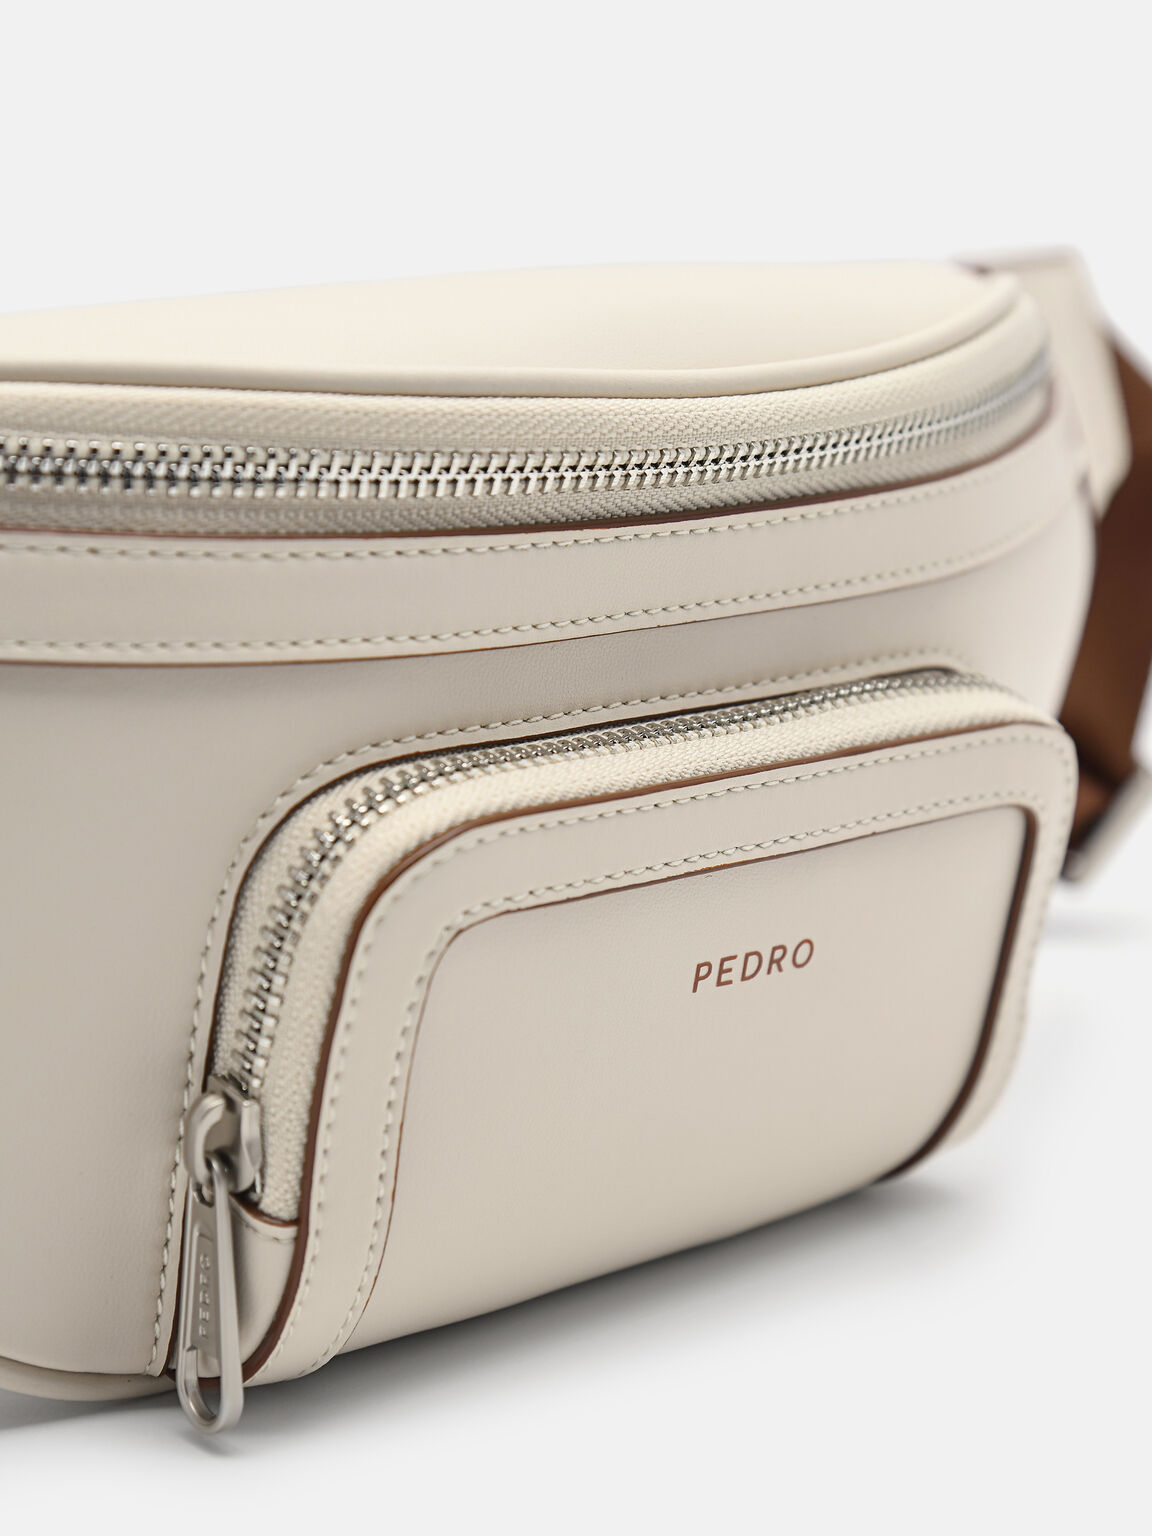 Fred Sling Pouch, Beige, hi-res